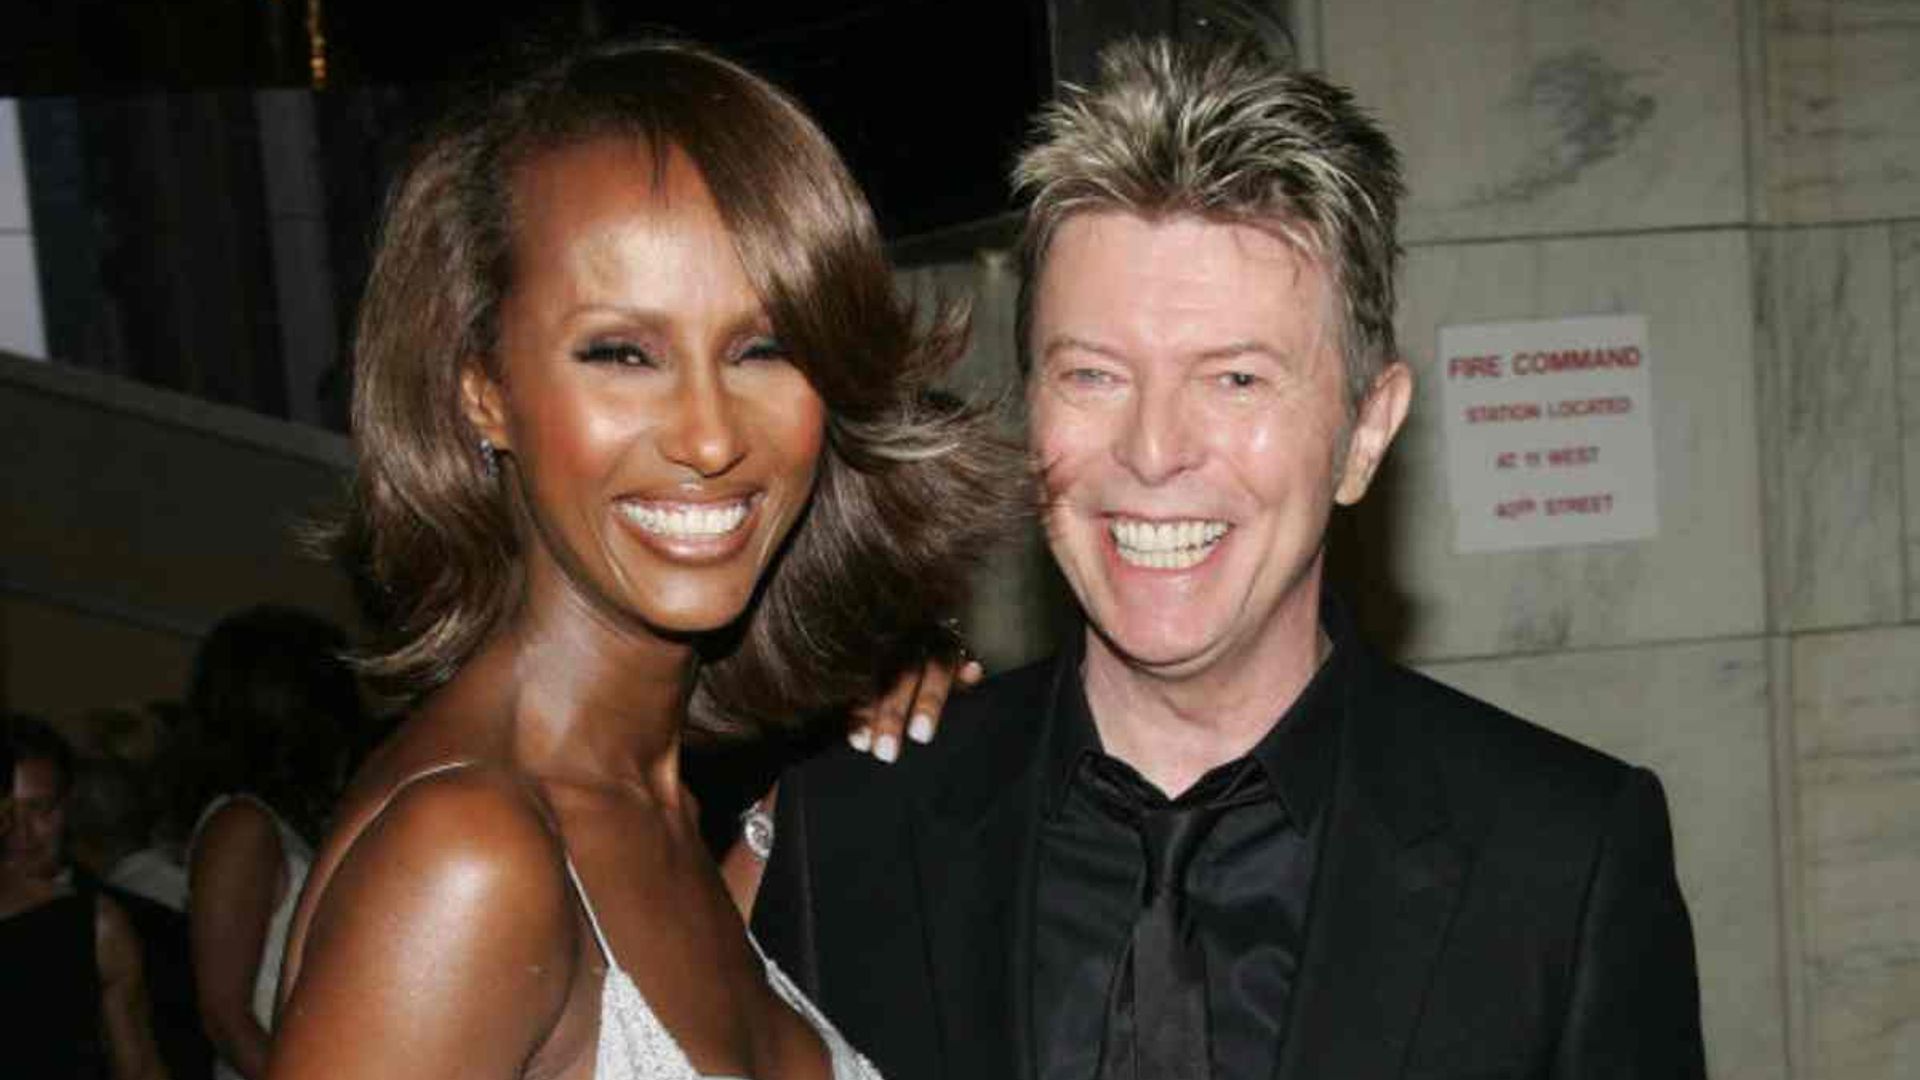 David Bowie's wife Iman opens up about their remarkable marriage five years after his death